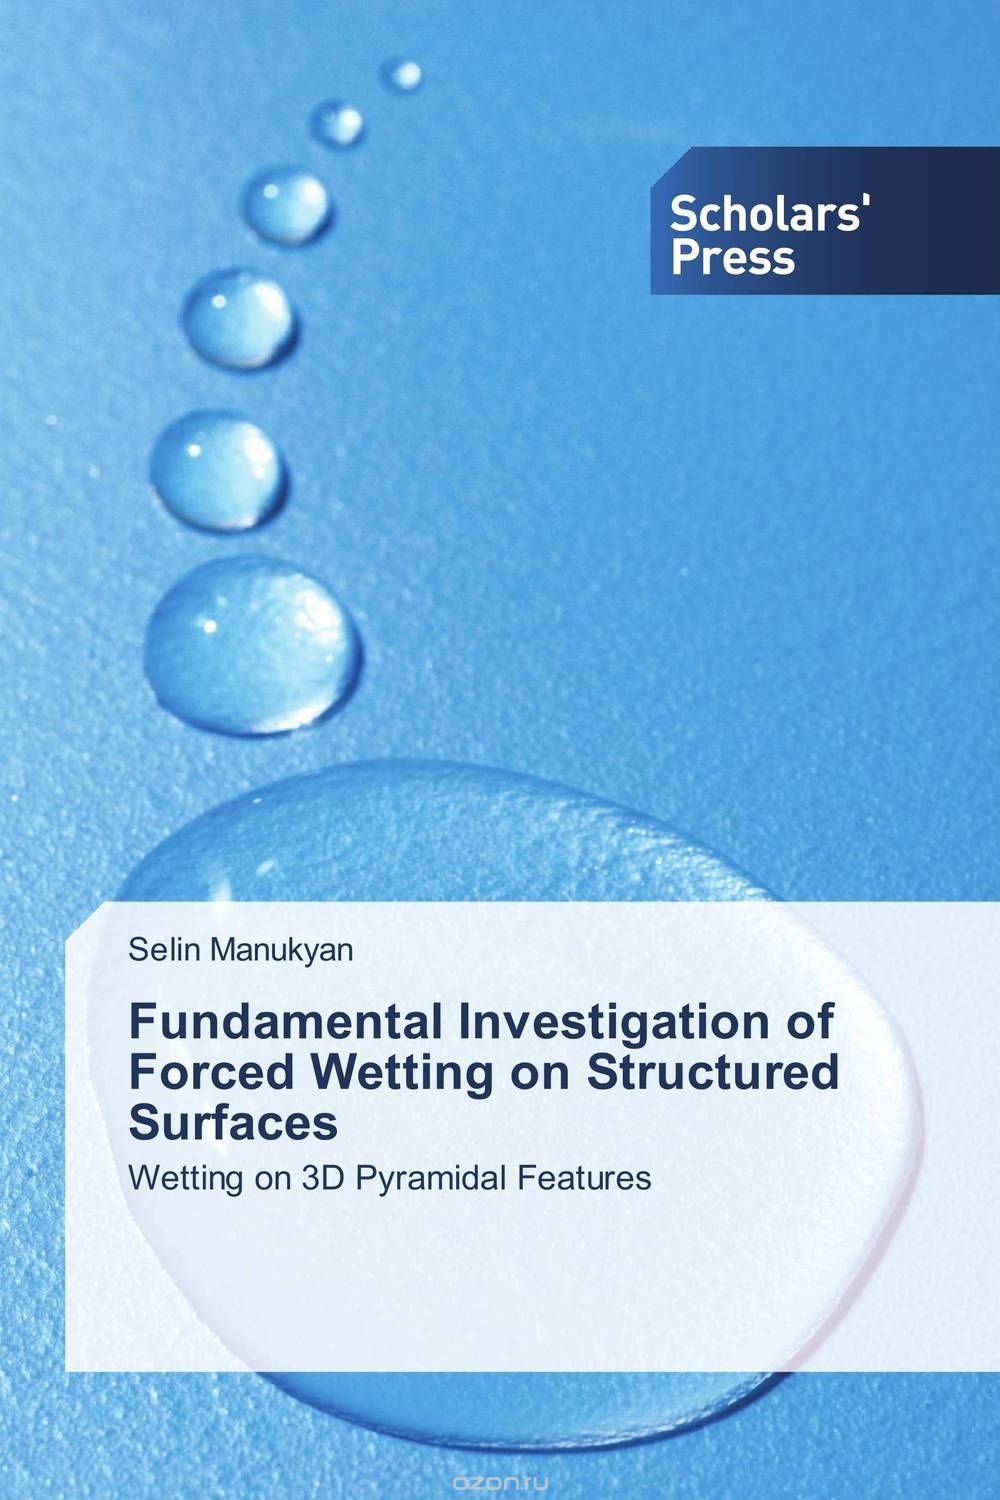 Скачать книгу "Fundamental Investigation of Forced Wetting on Structured Surfaces"